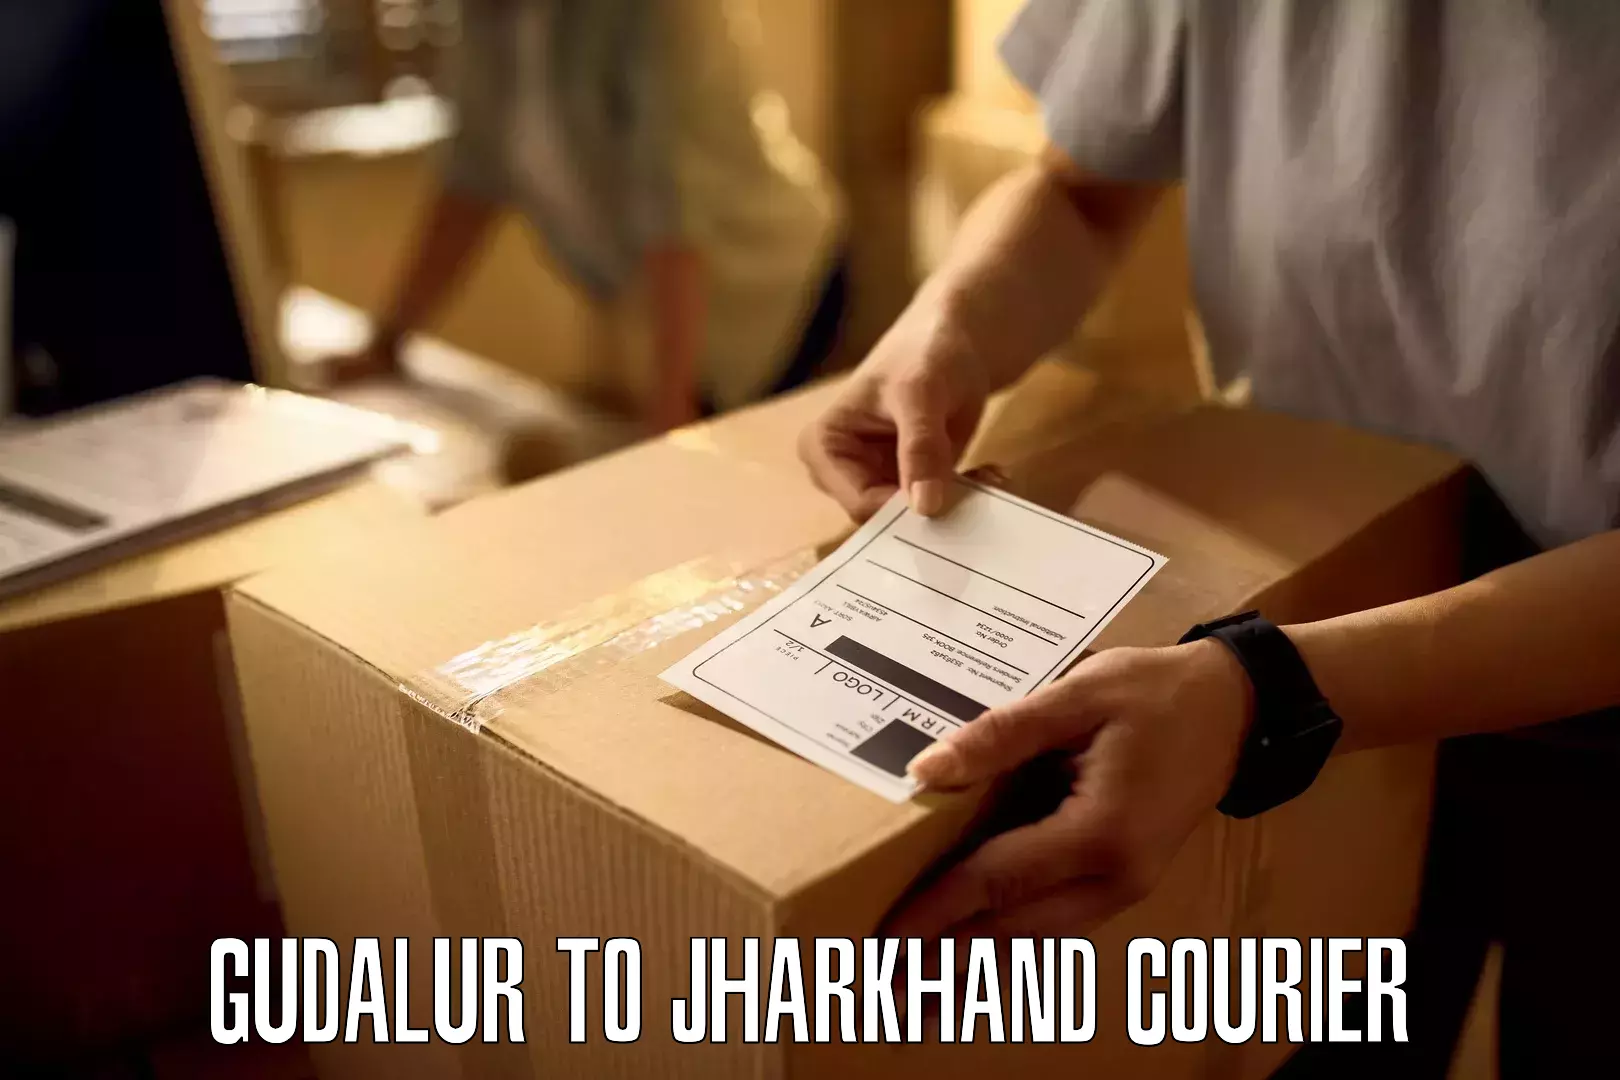 On-call courier service Gudalur to Phusro